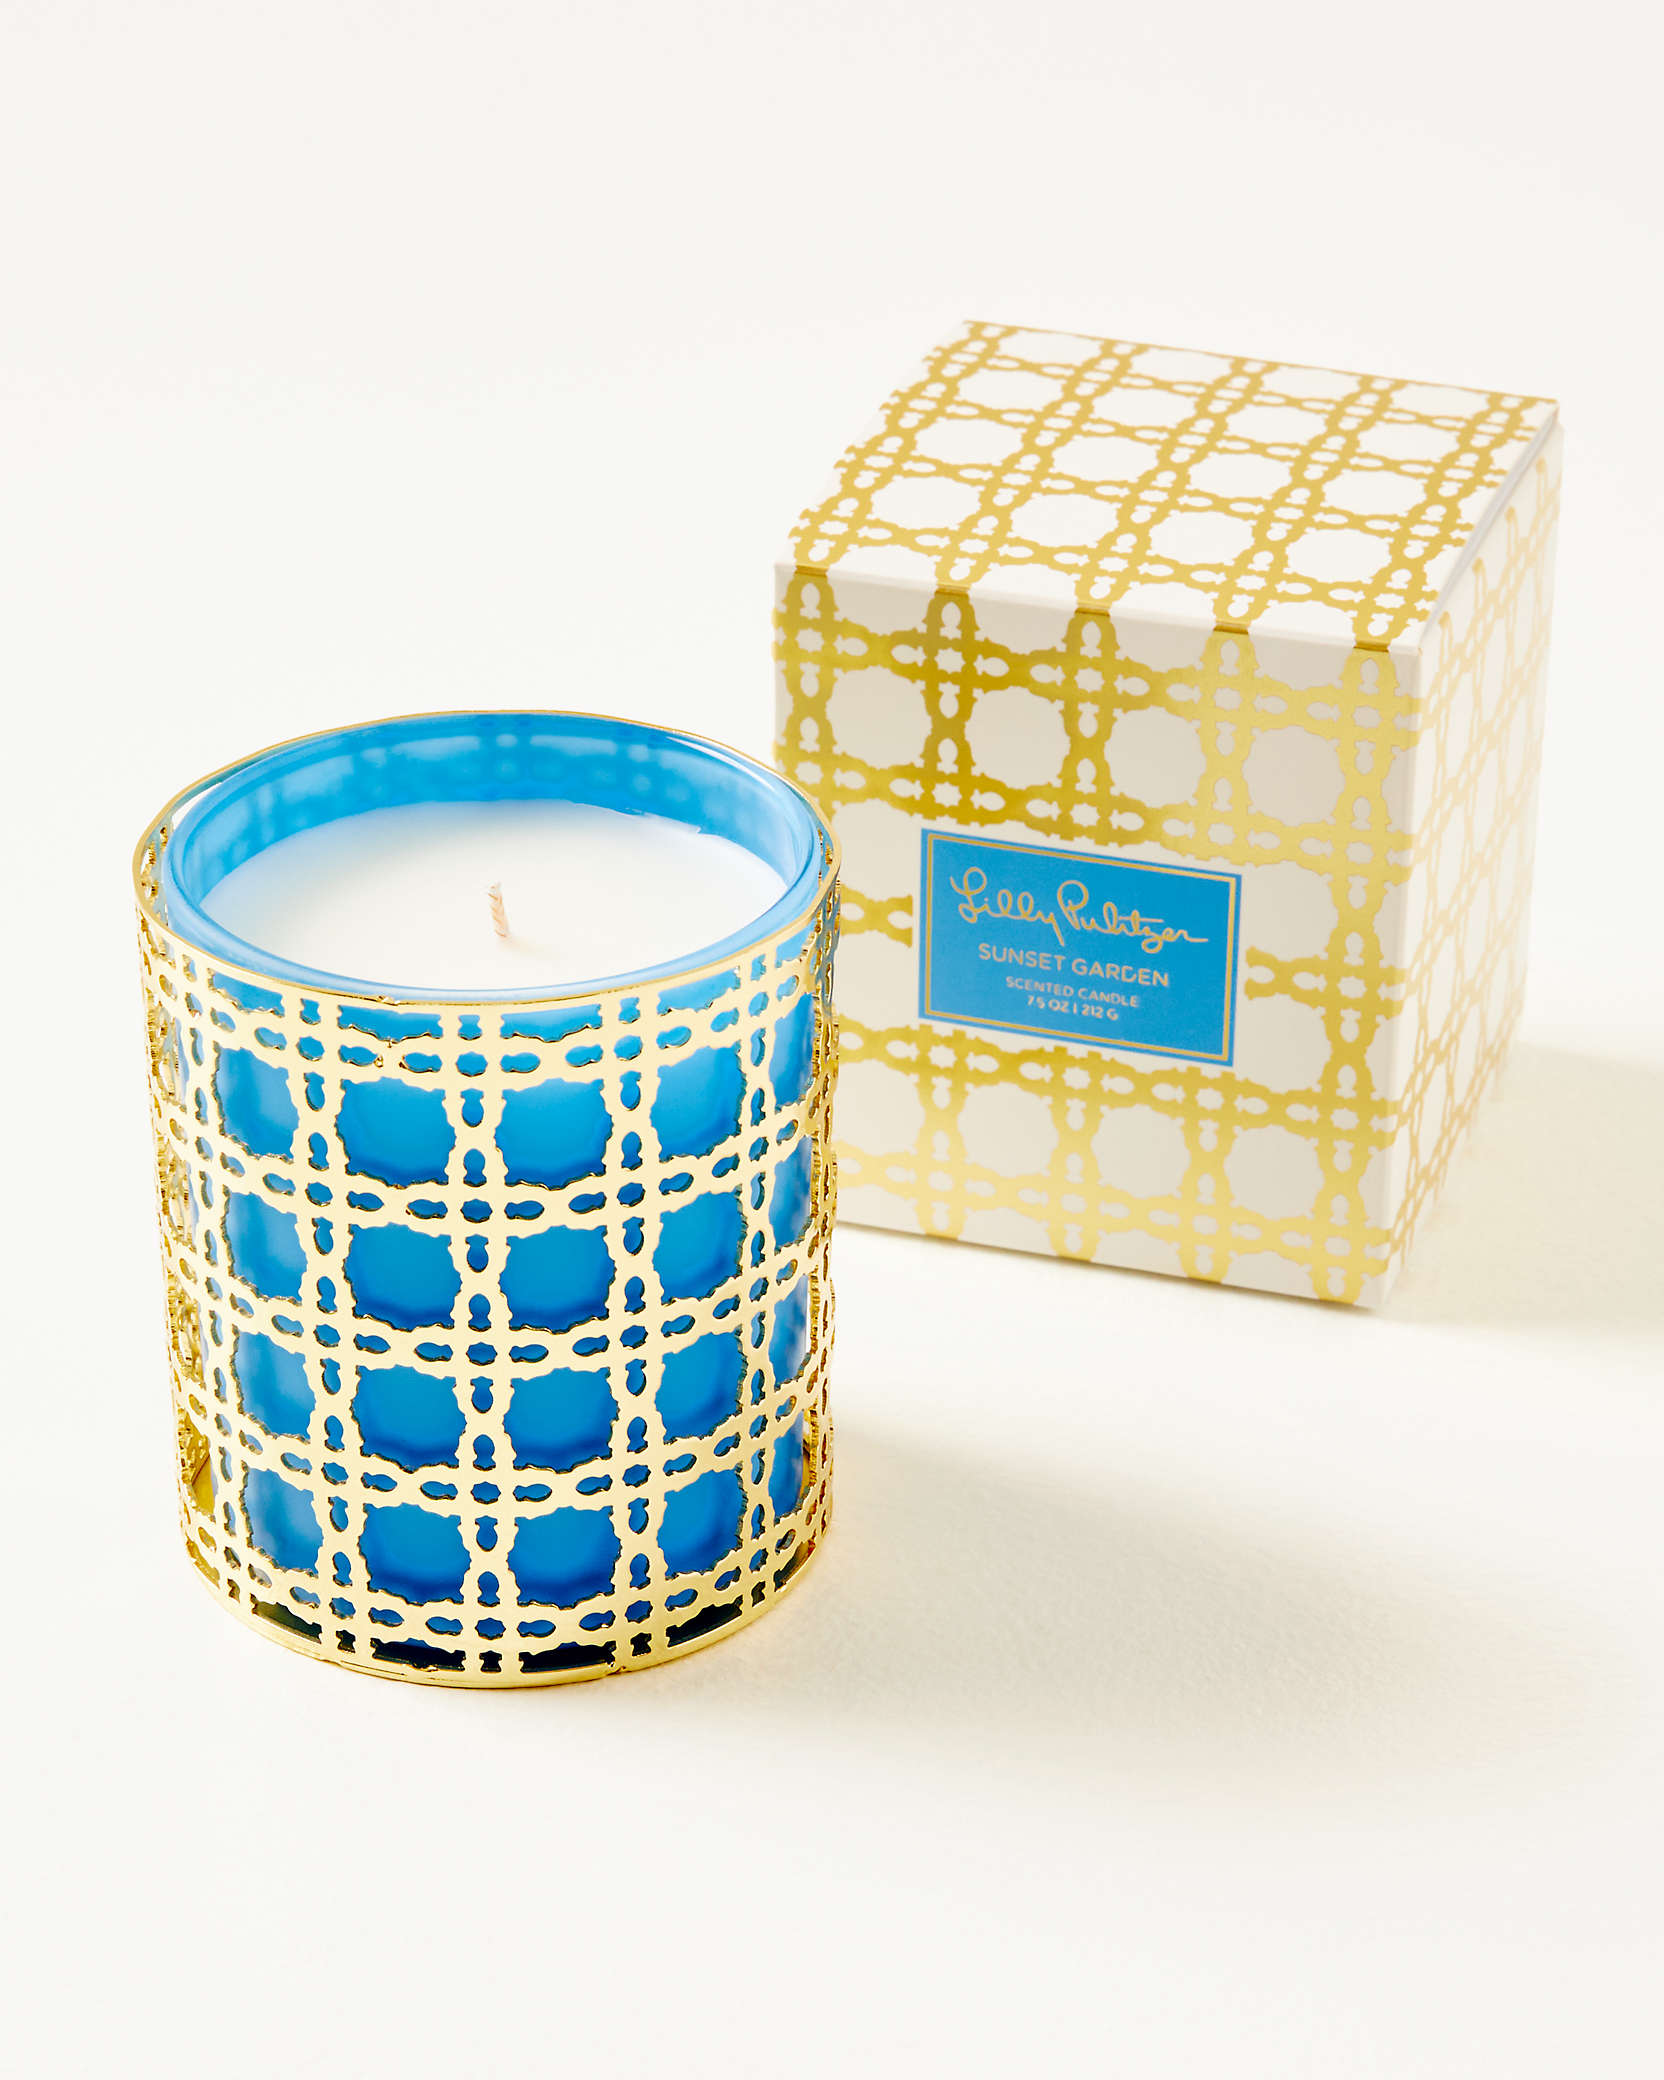 Lilly Pulitzer Candle With Metal Caning Container In Abaco Blue